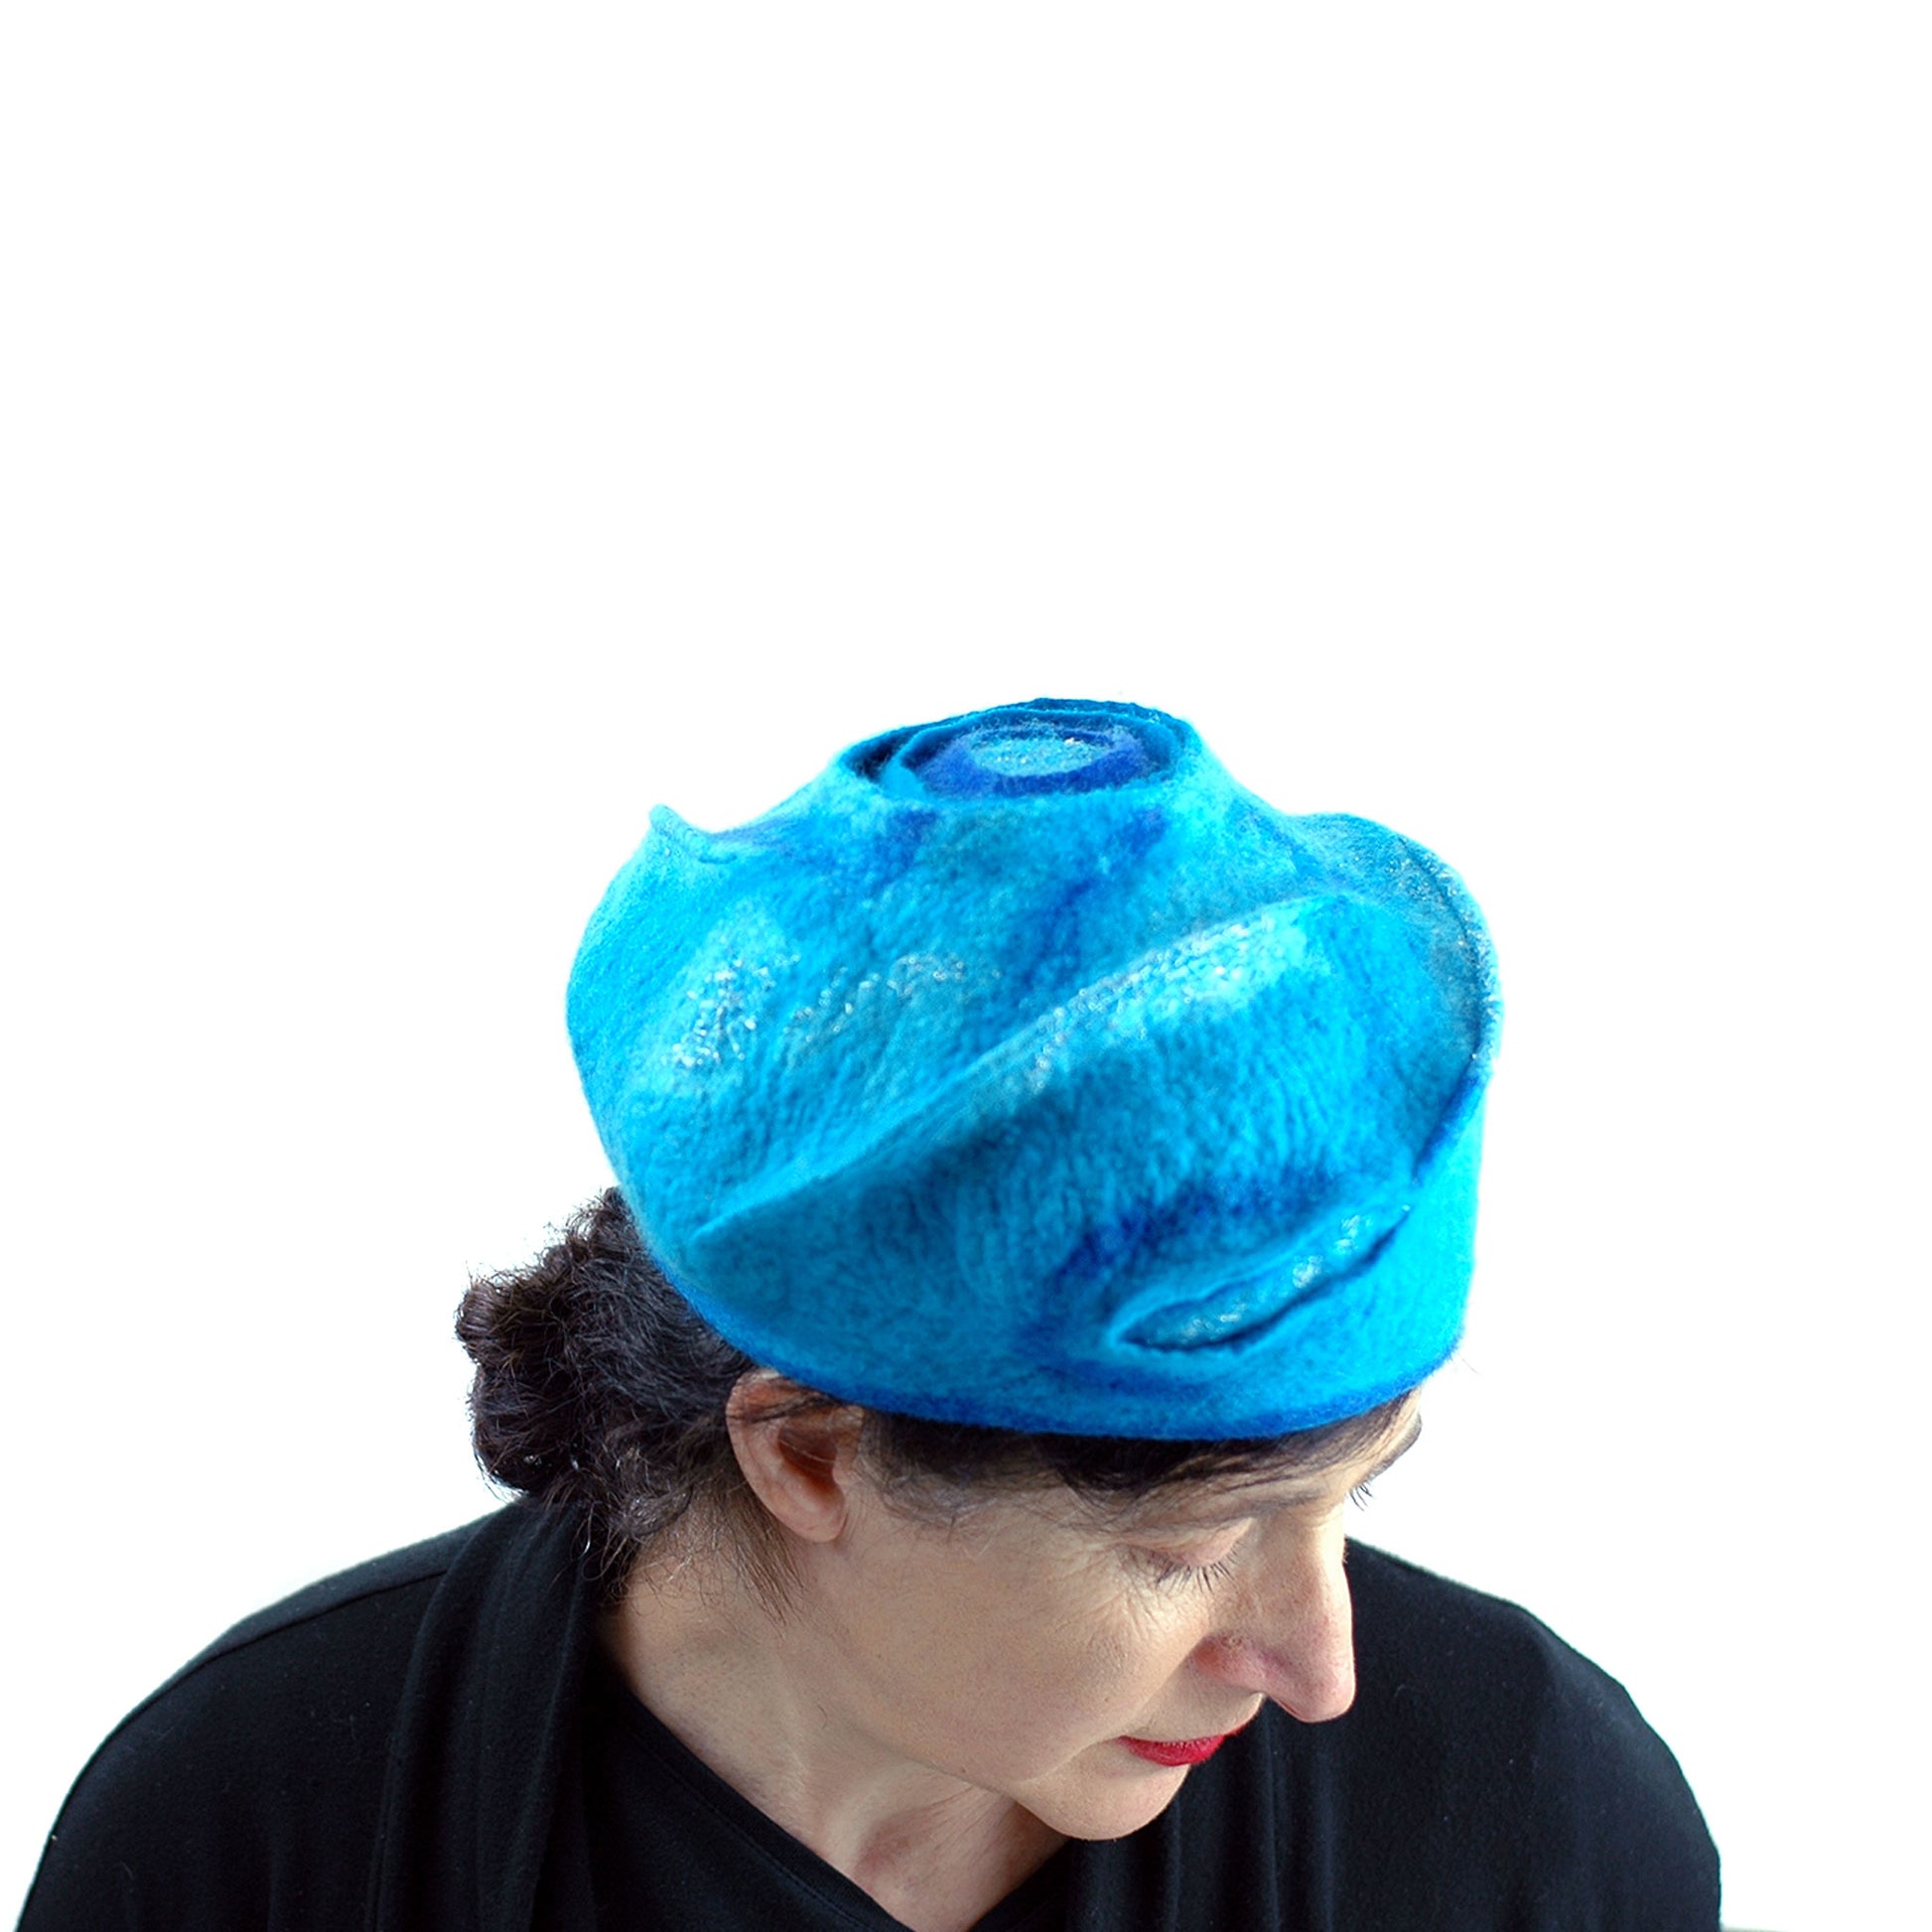 Turquoise Blue Beret with Concentric Circles on Top - top view